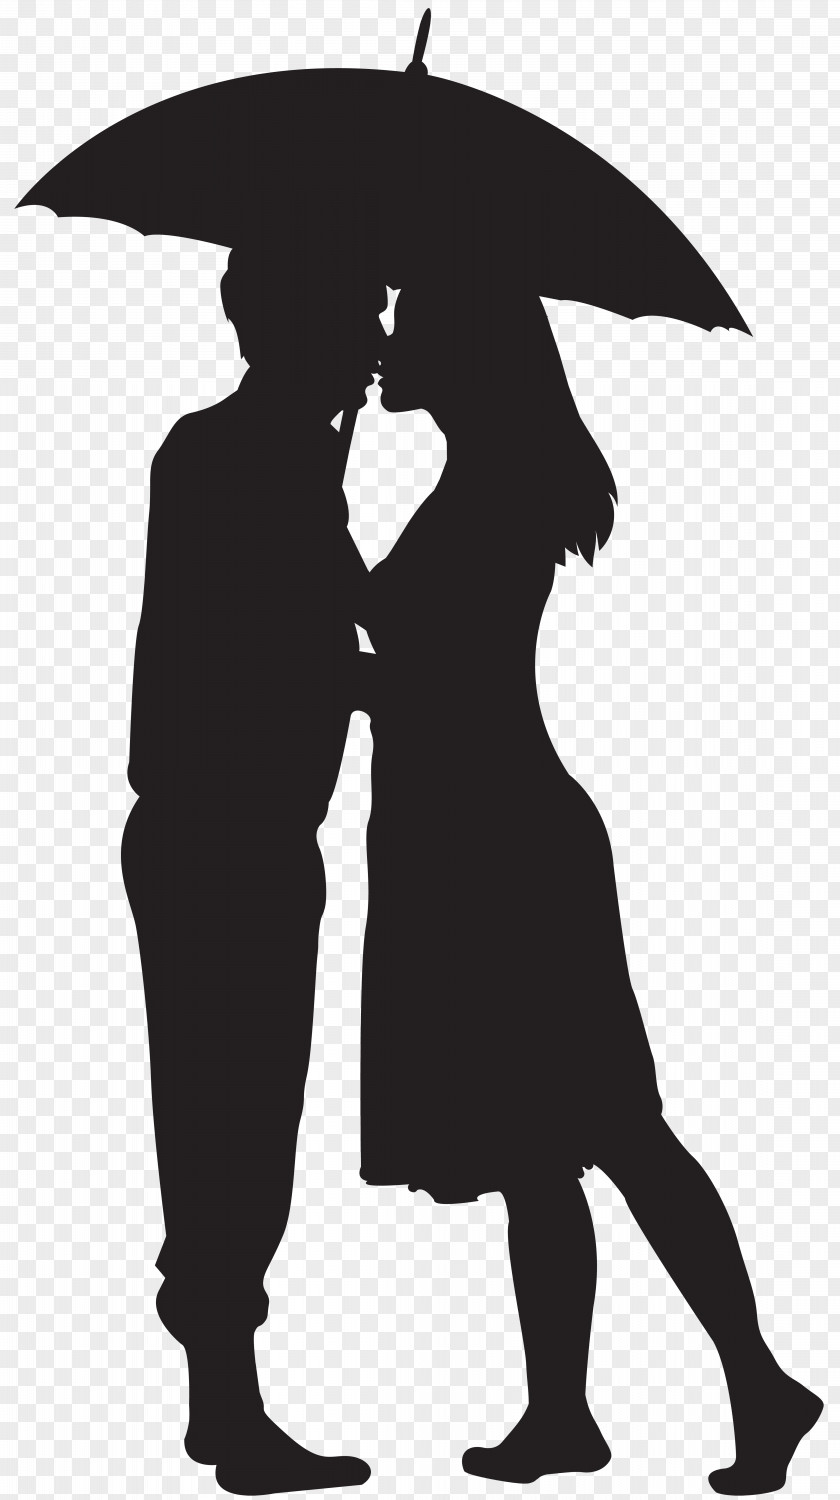 Loving Couple Silhouette Clip Art Image PNG